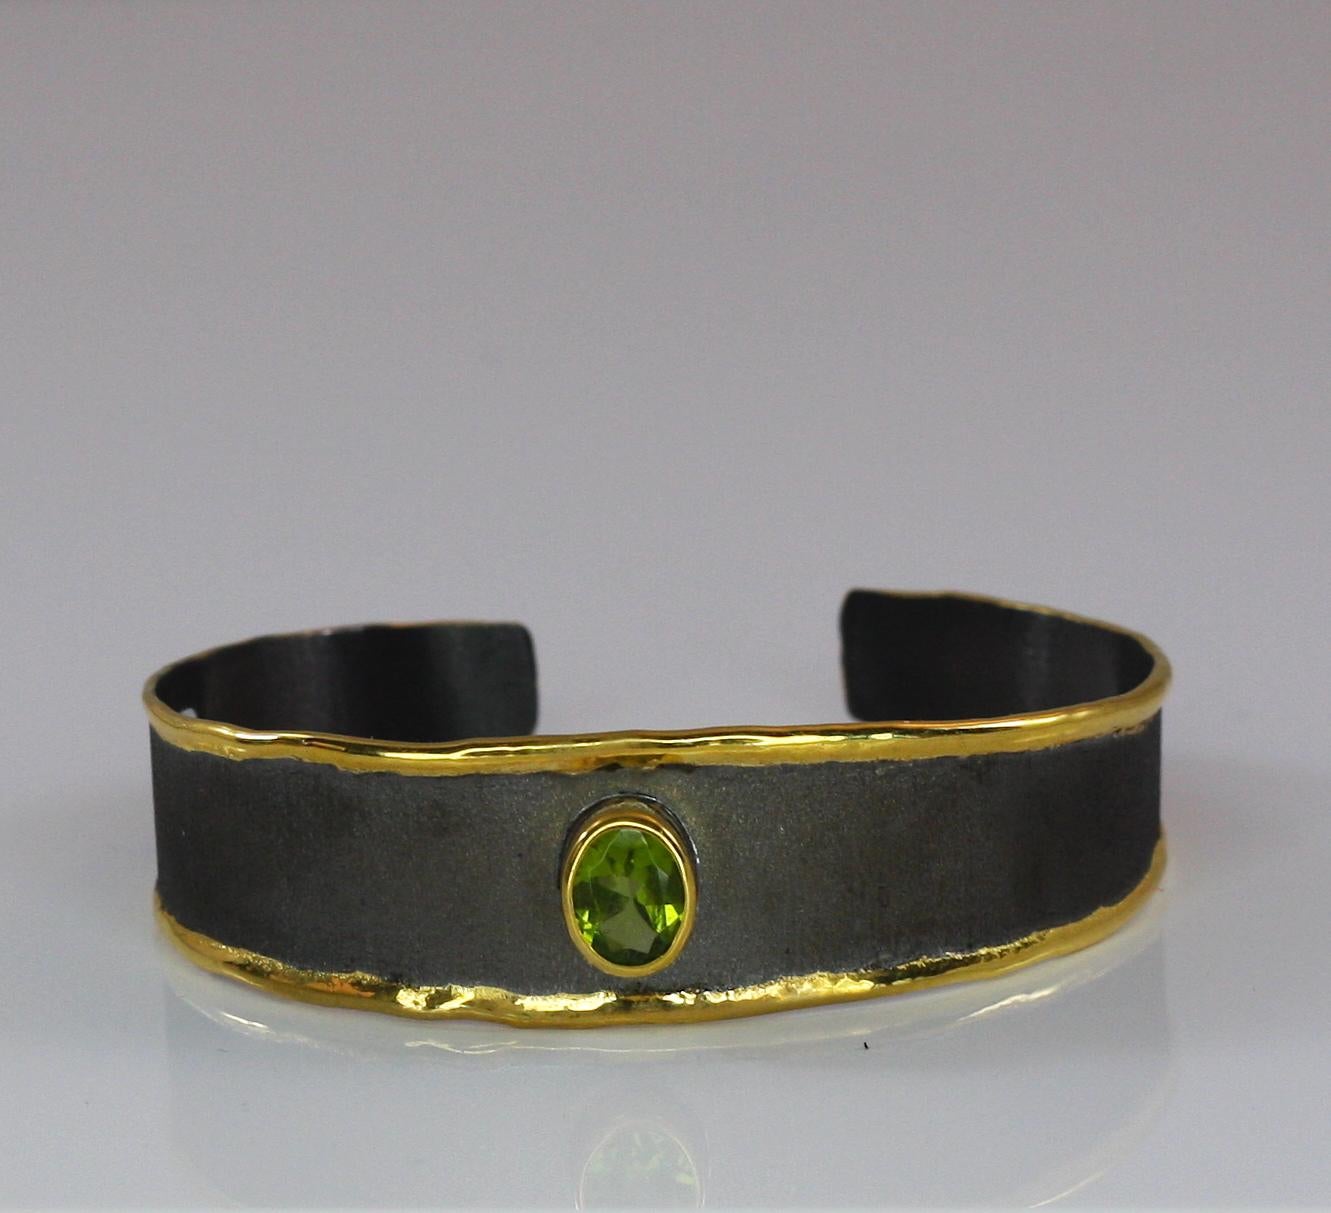 Yianni Creations cuff bracelet crafted in Greece for Eclyps Collection from fine silver 950 purity and plated with Black Rhodium which is the most valuable metal. This gorgeous handmade artisan bangle cuff bracelet features an oval natural Peridot